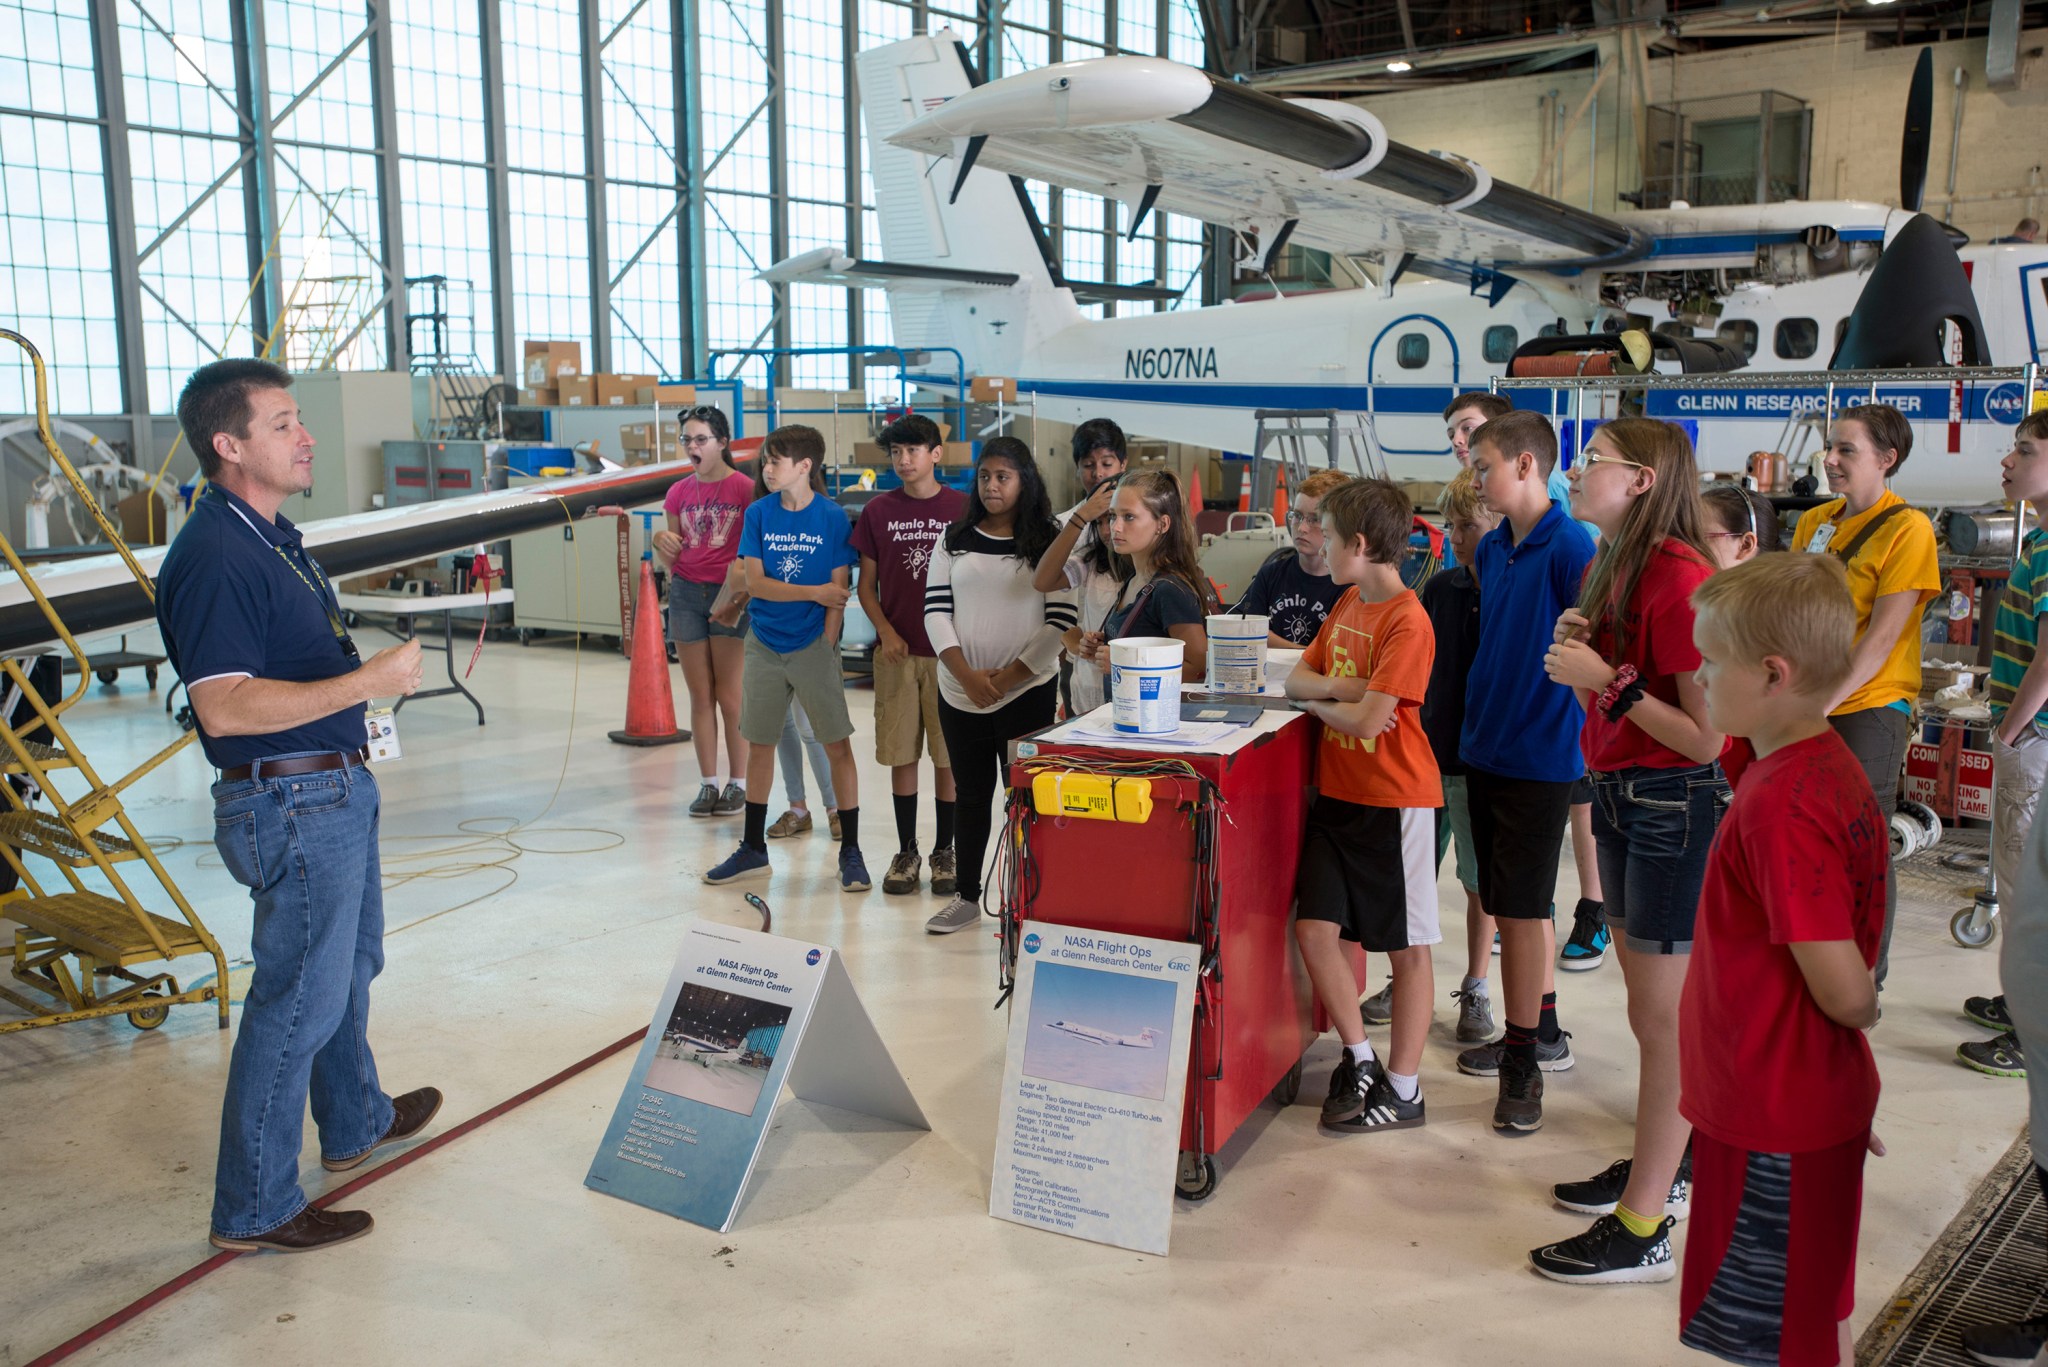 NASA Glenn Pilot conducting a Flight Research Facility tour with students during Aviation Day